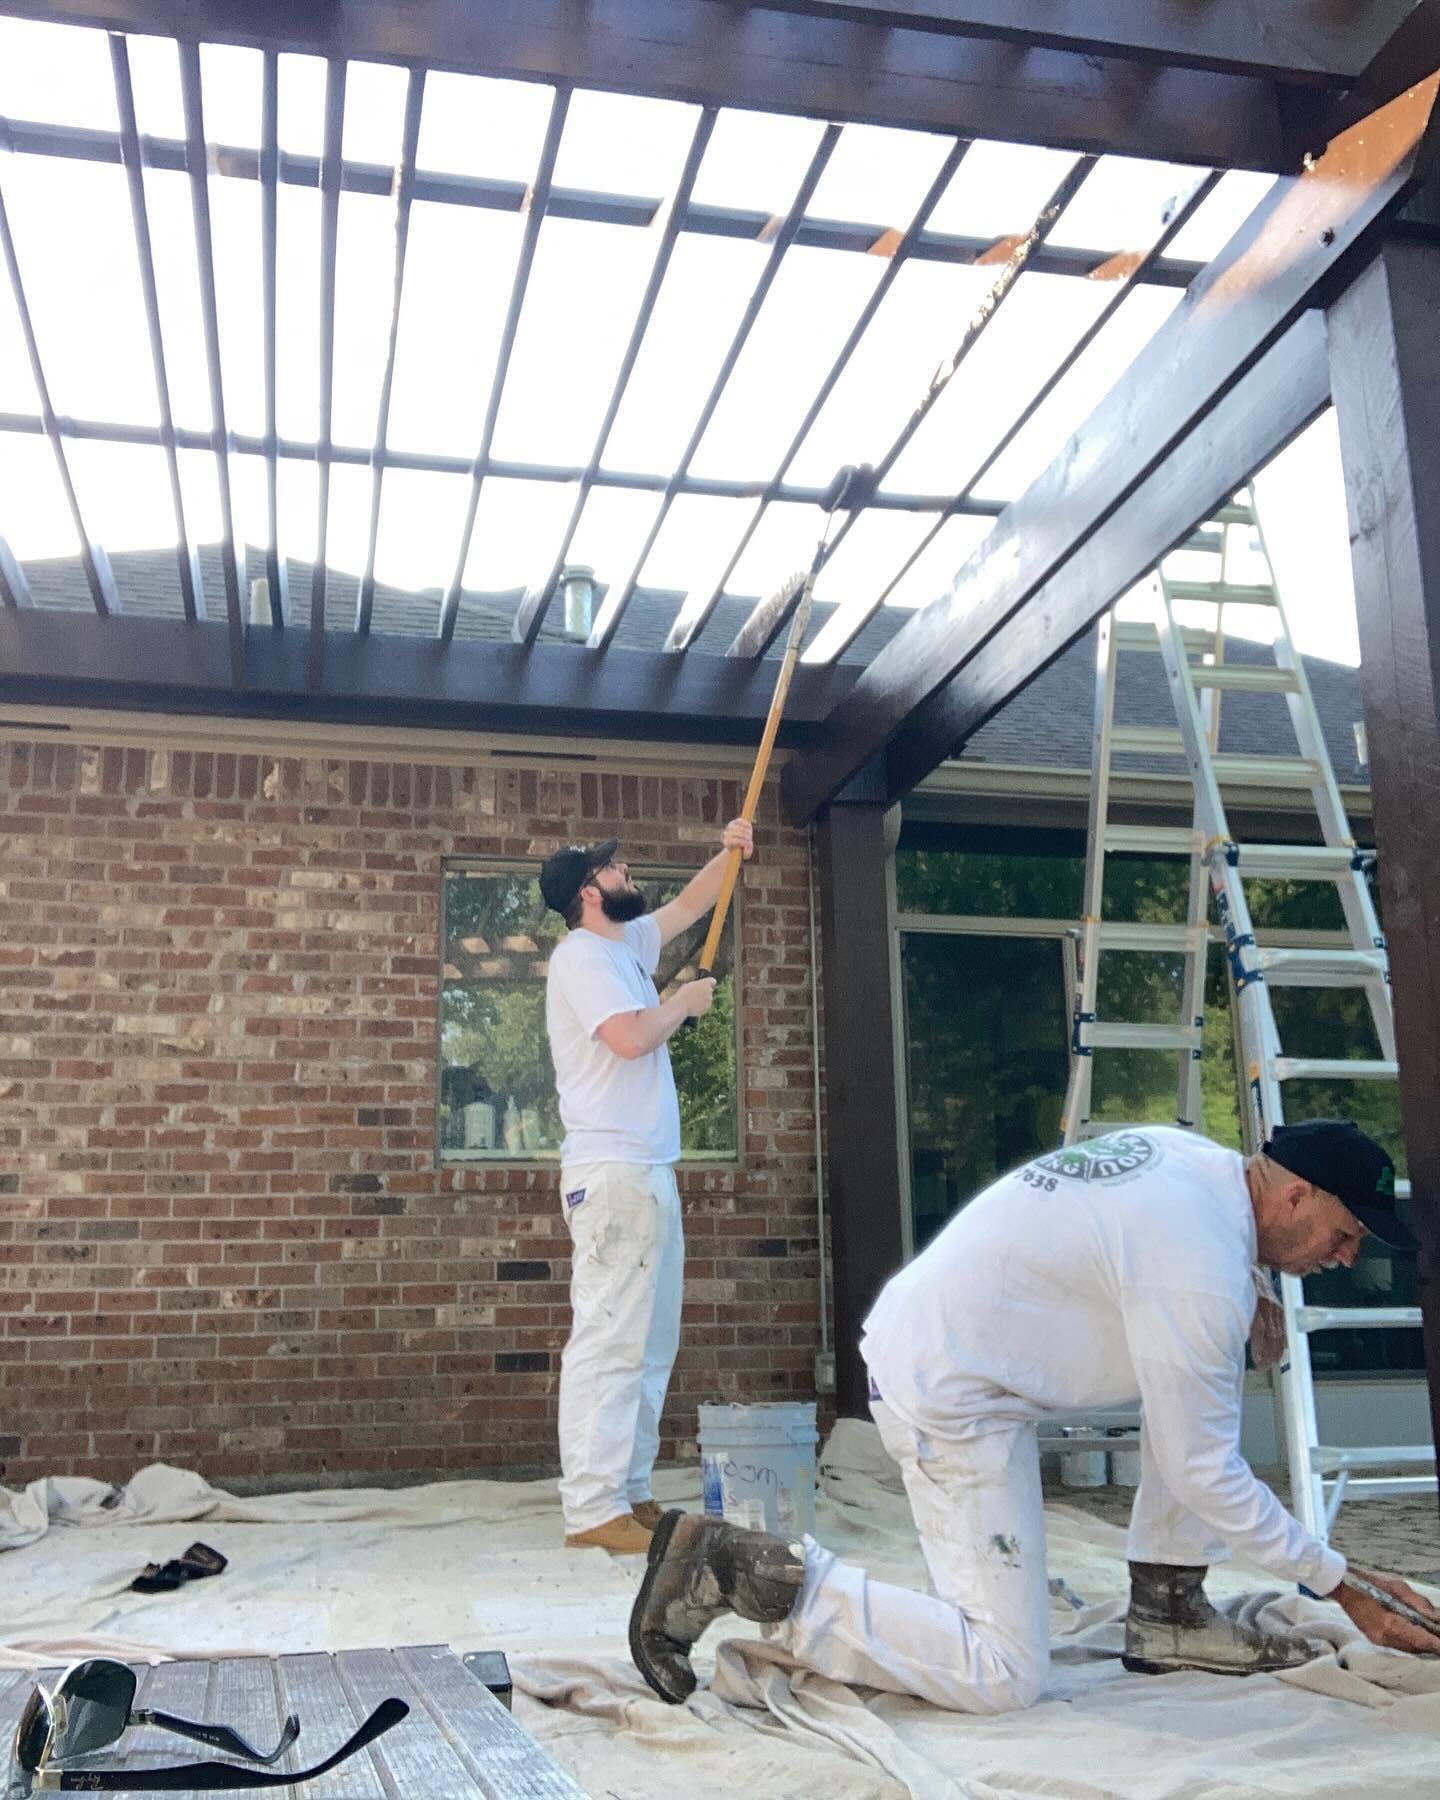 At Bayou Painting every job is a family function🧔&zwj;♂️🧔

Looking to support your local businesses?🐊 Give us a call today for your FREE estimate!☎️ 

#bayoupainting #louisiana #batonrouge #painter #contractor #services #smallbusiness #localbusine